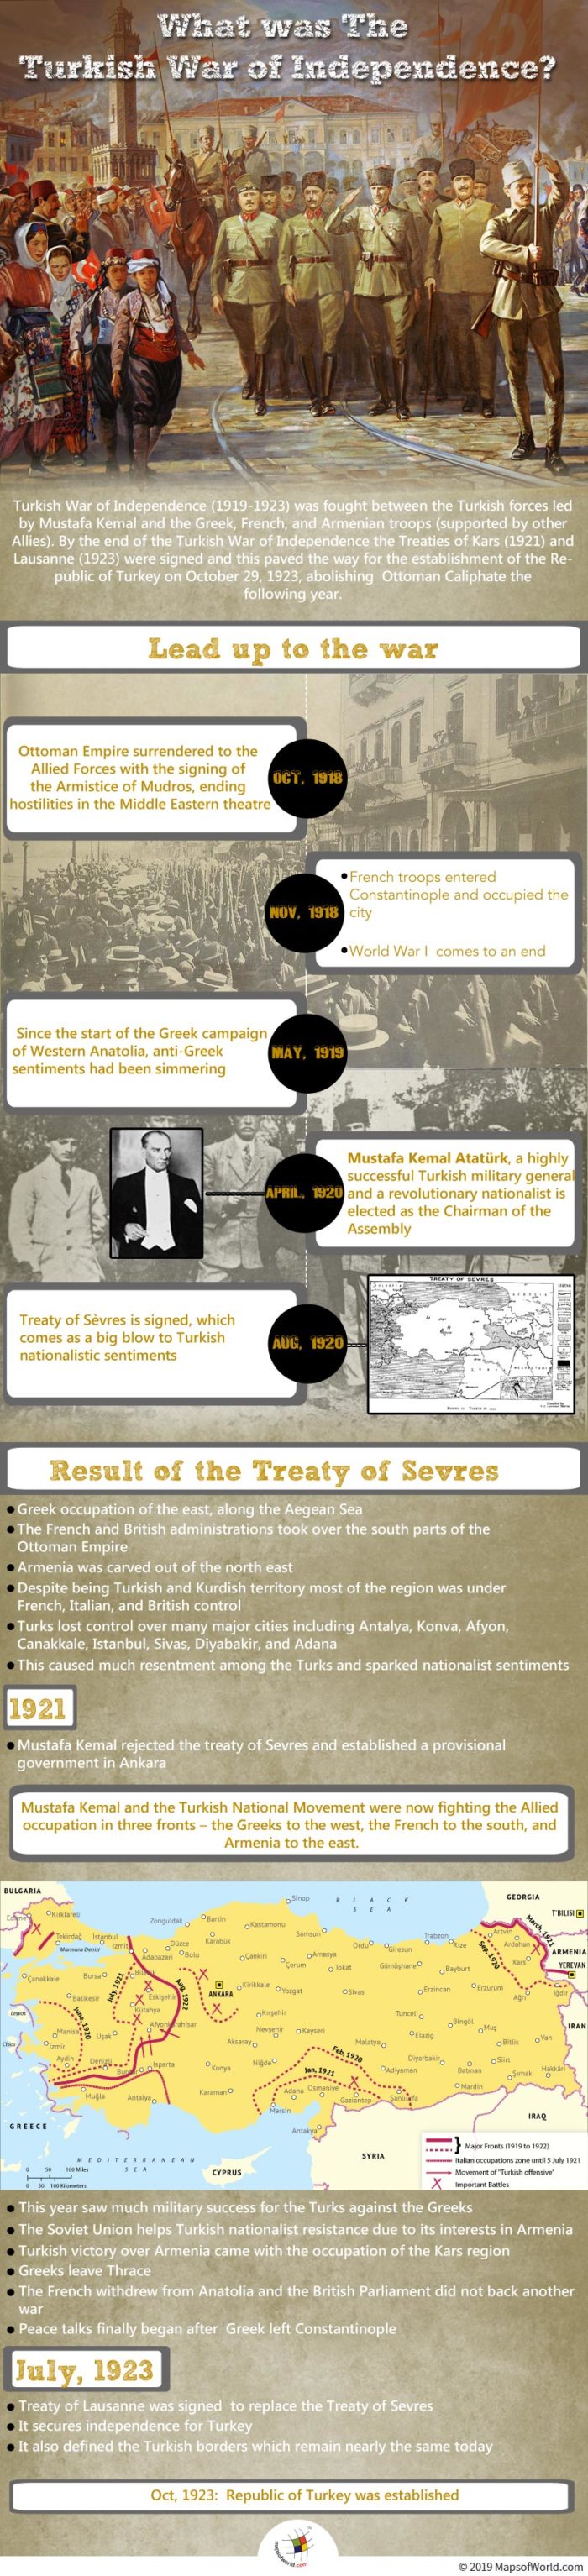 Infographic Giving Details on The Turkish War of Independence